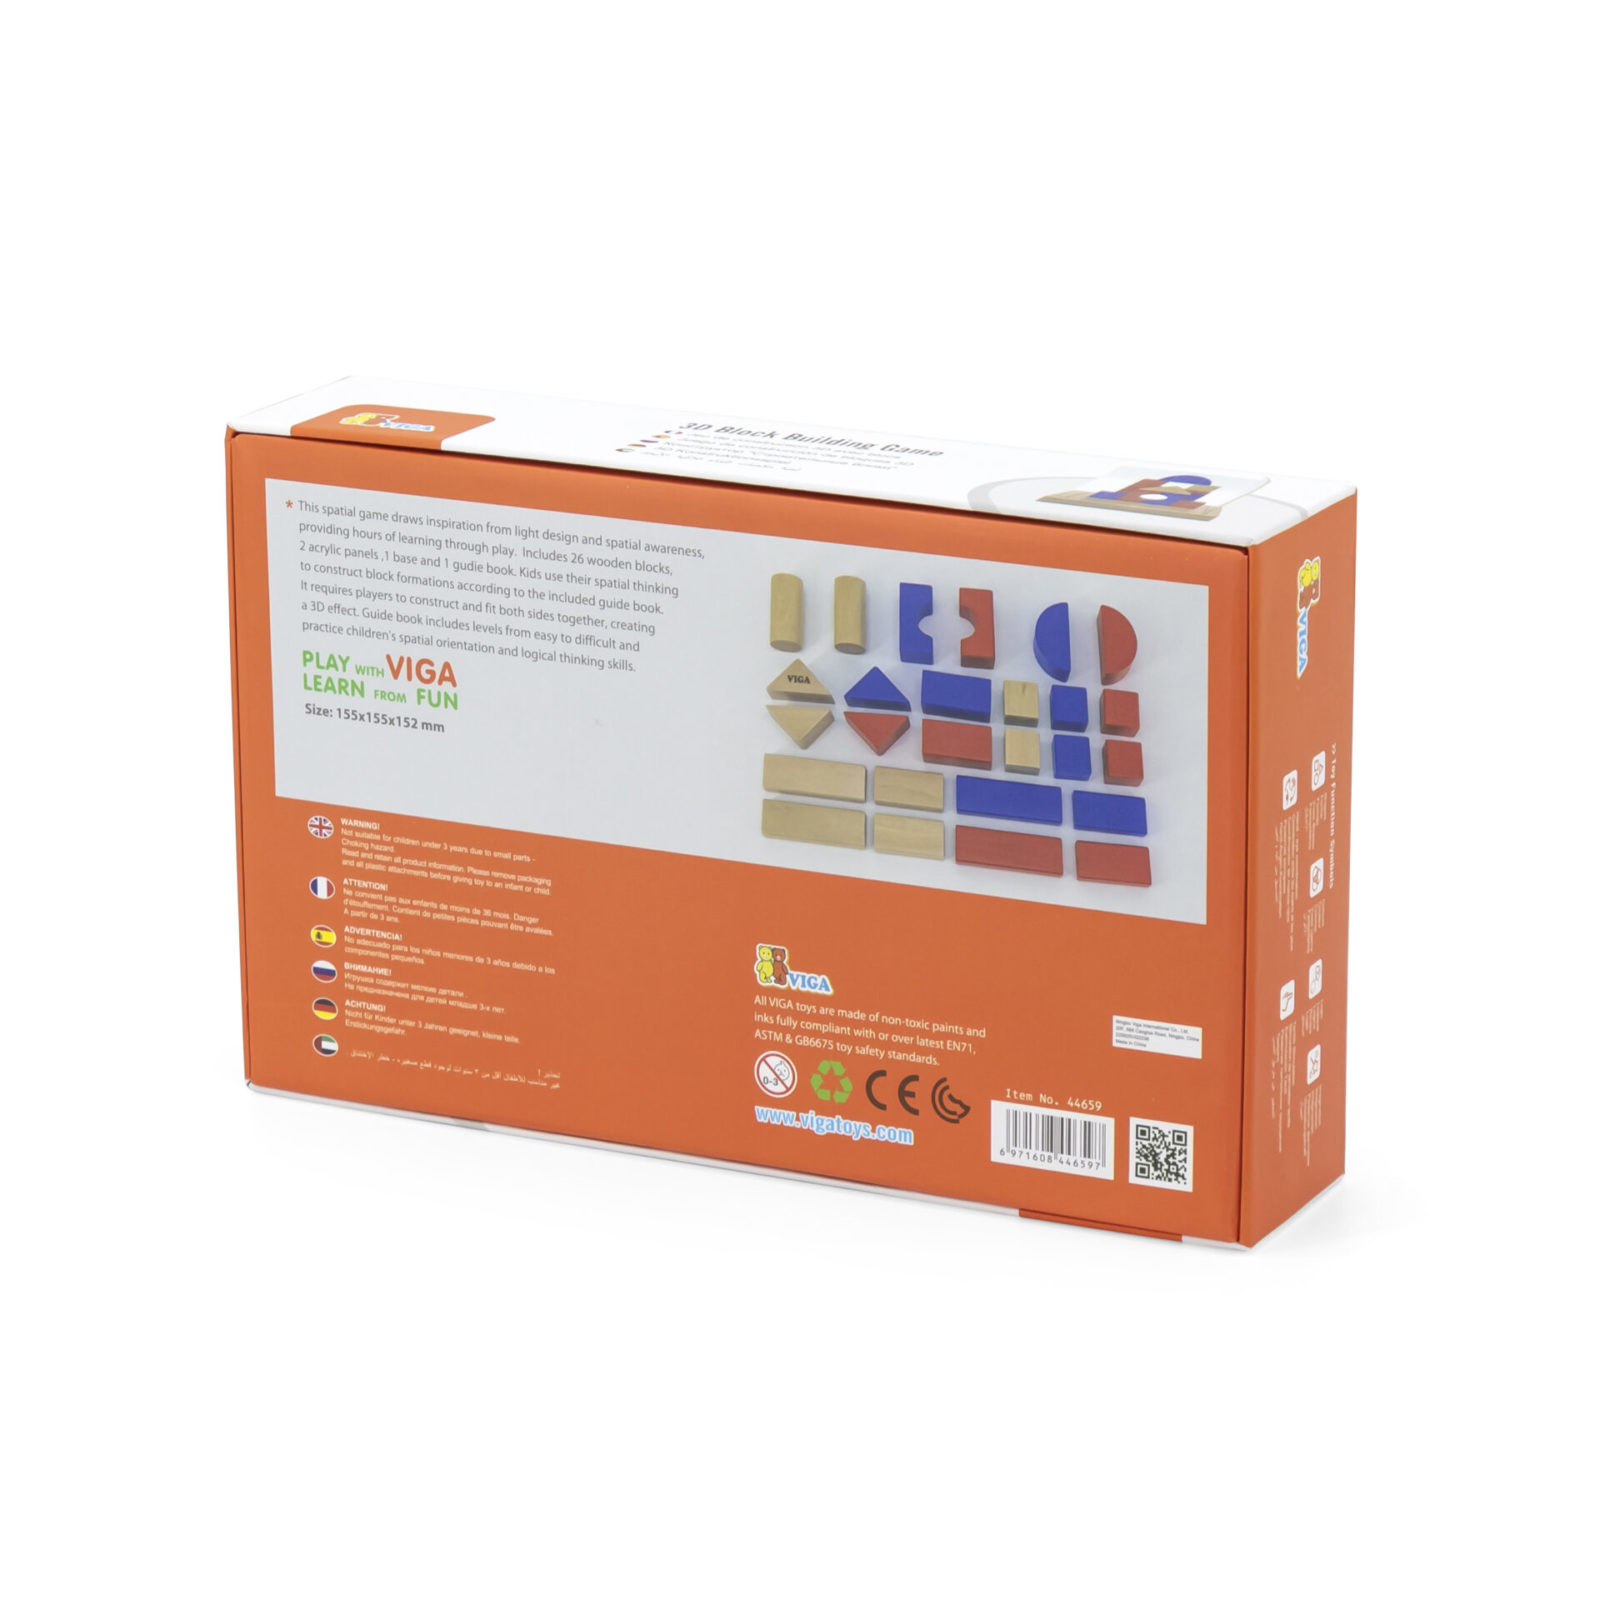 box containing 3D block building game